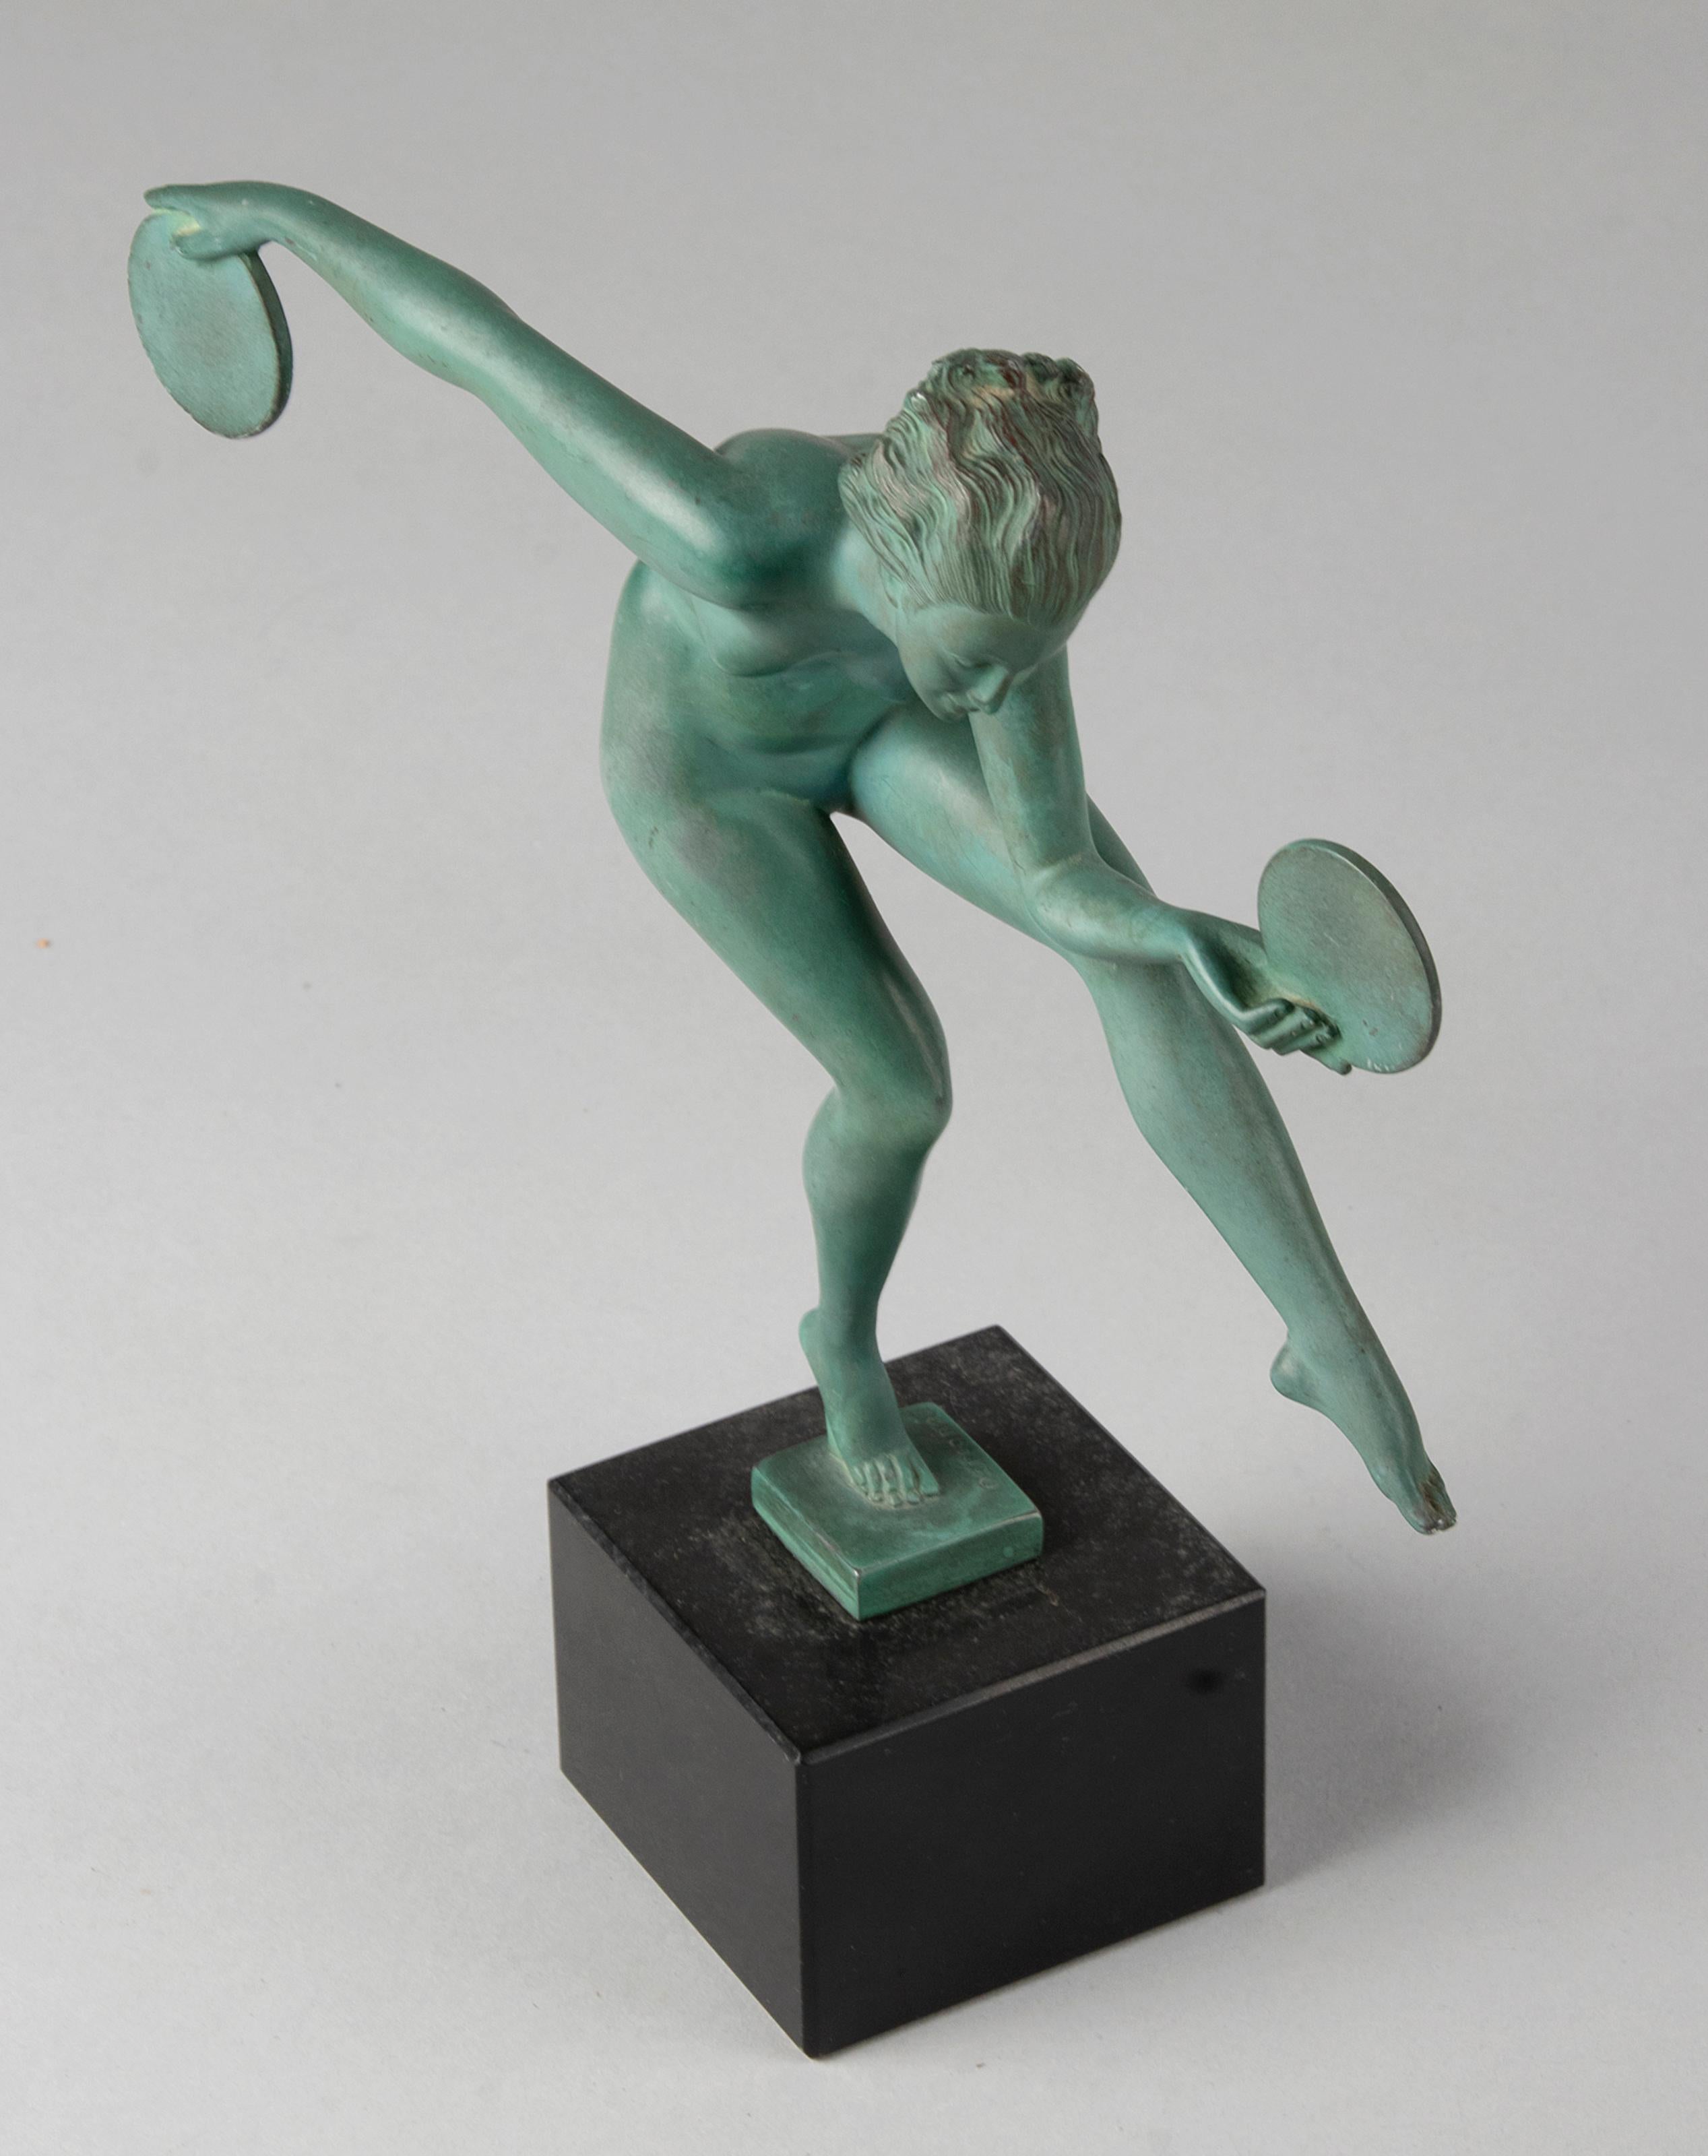 French Art Deco Sculpture Signed Derenne by Marcel Bouraine Dancing Lady 9